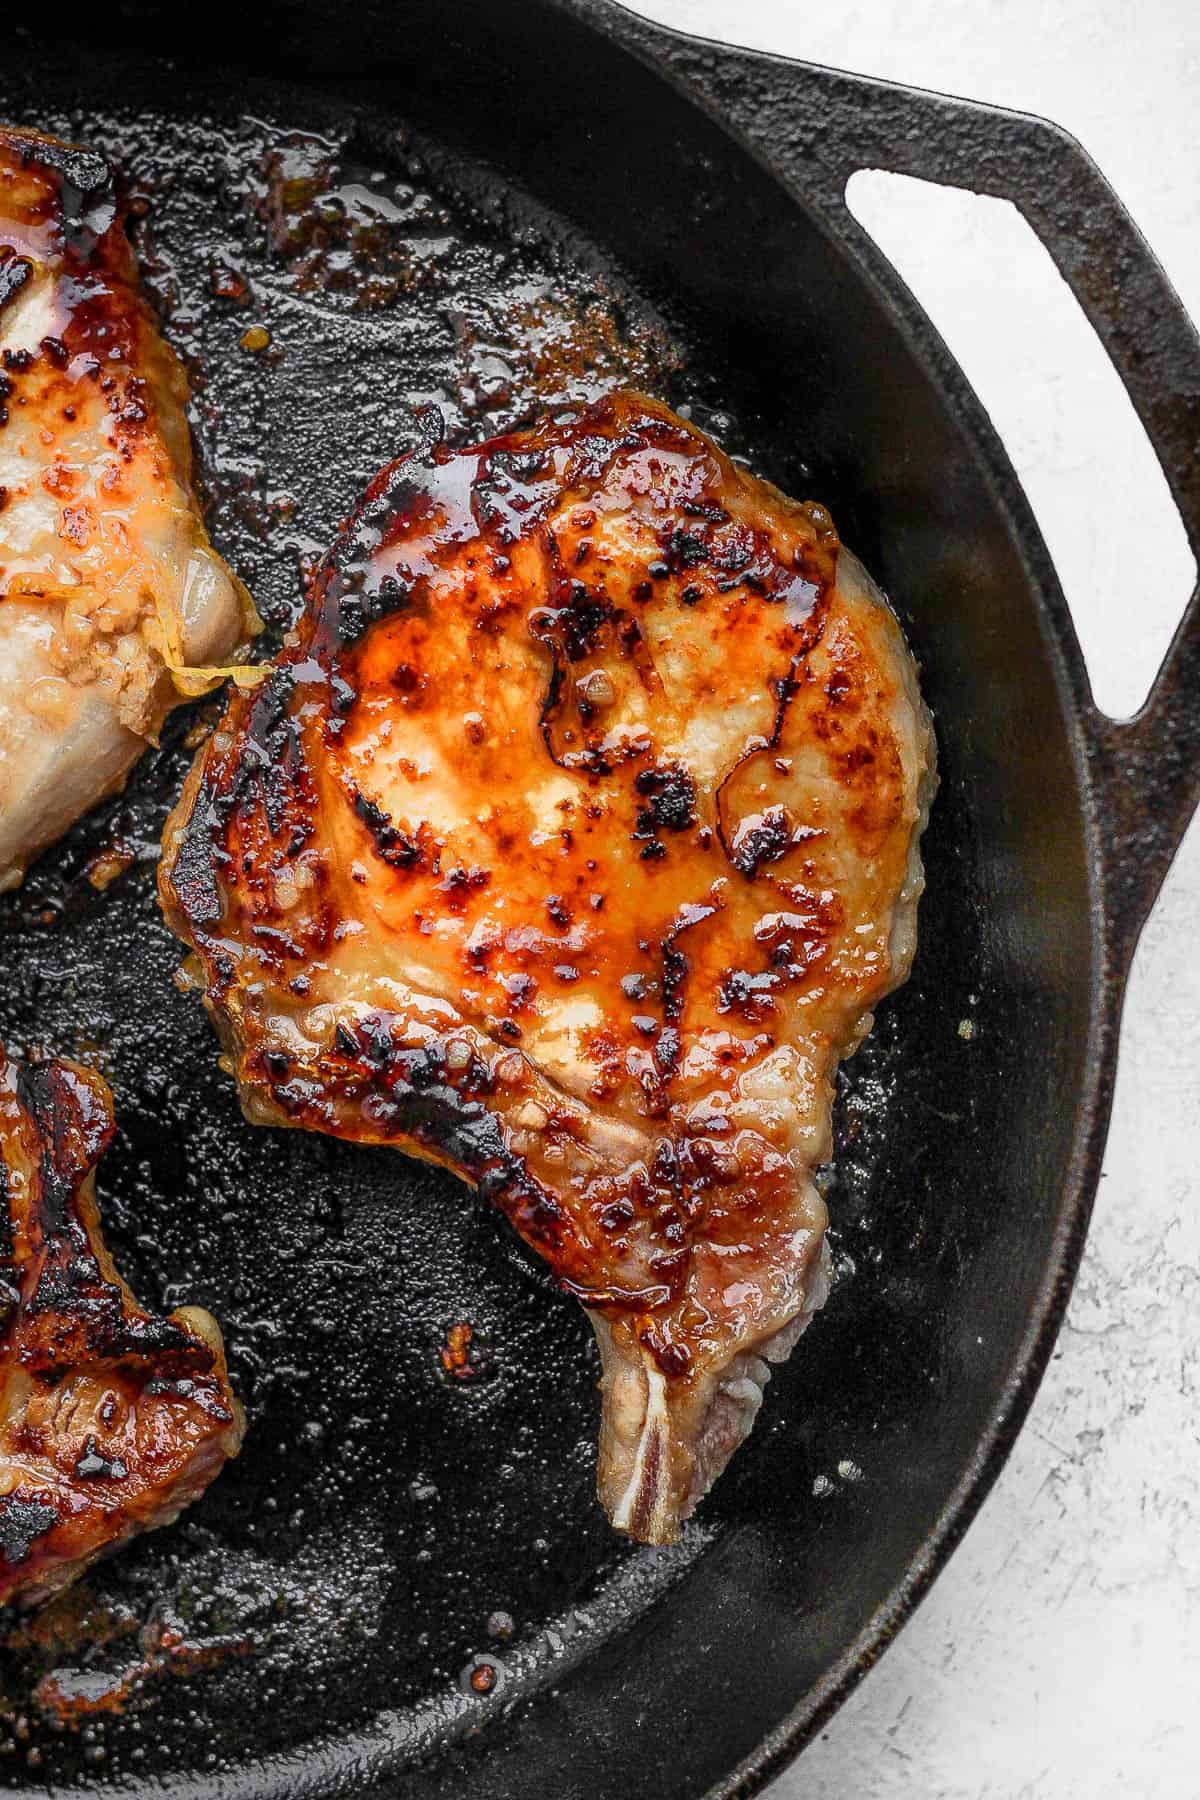 Pork chops cooking in a cast iron skillet.